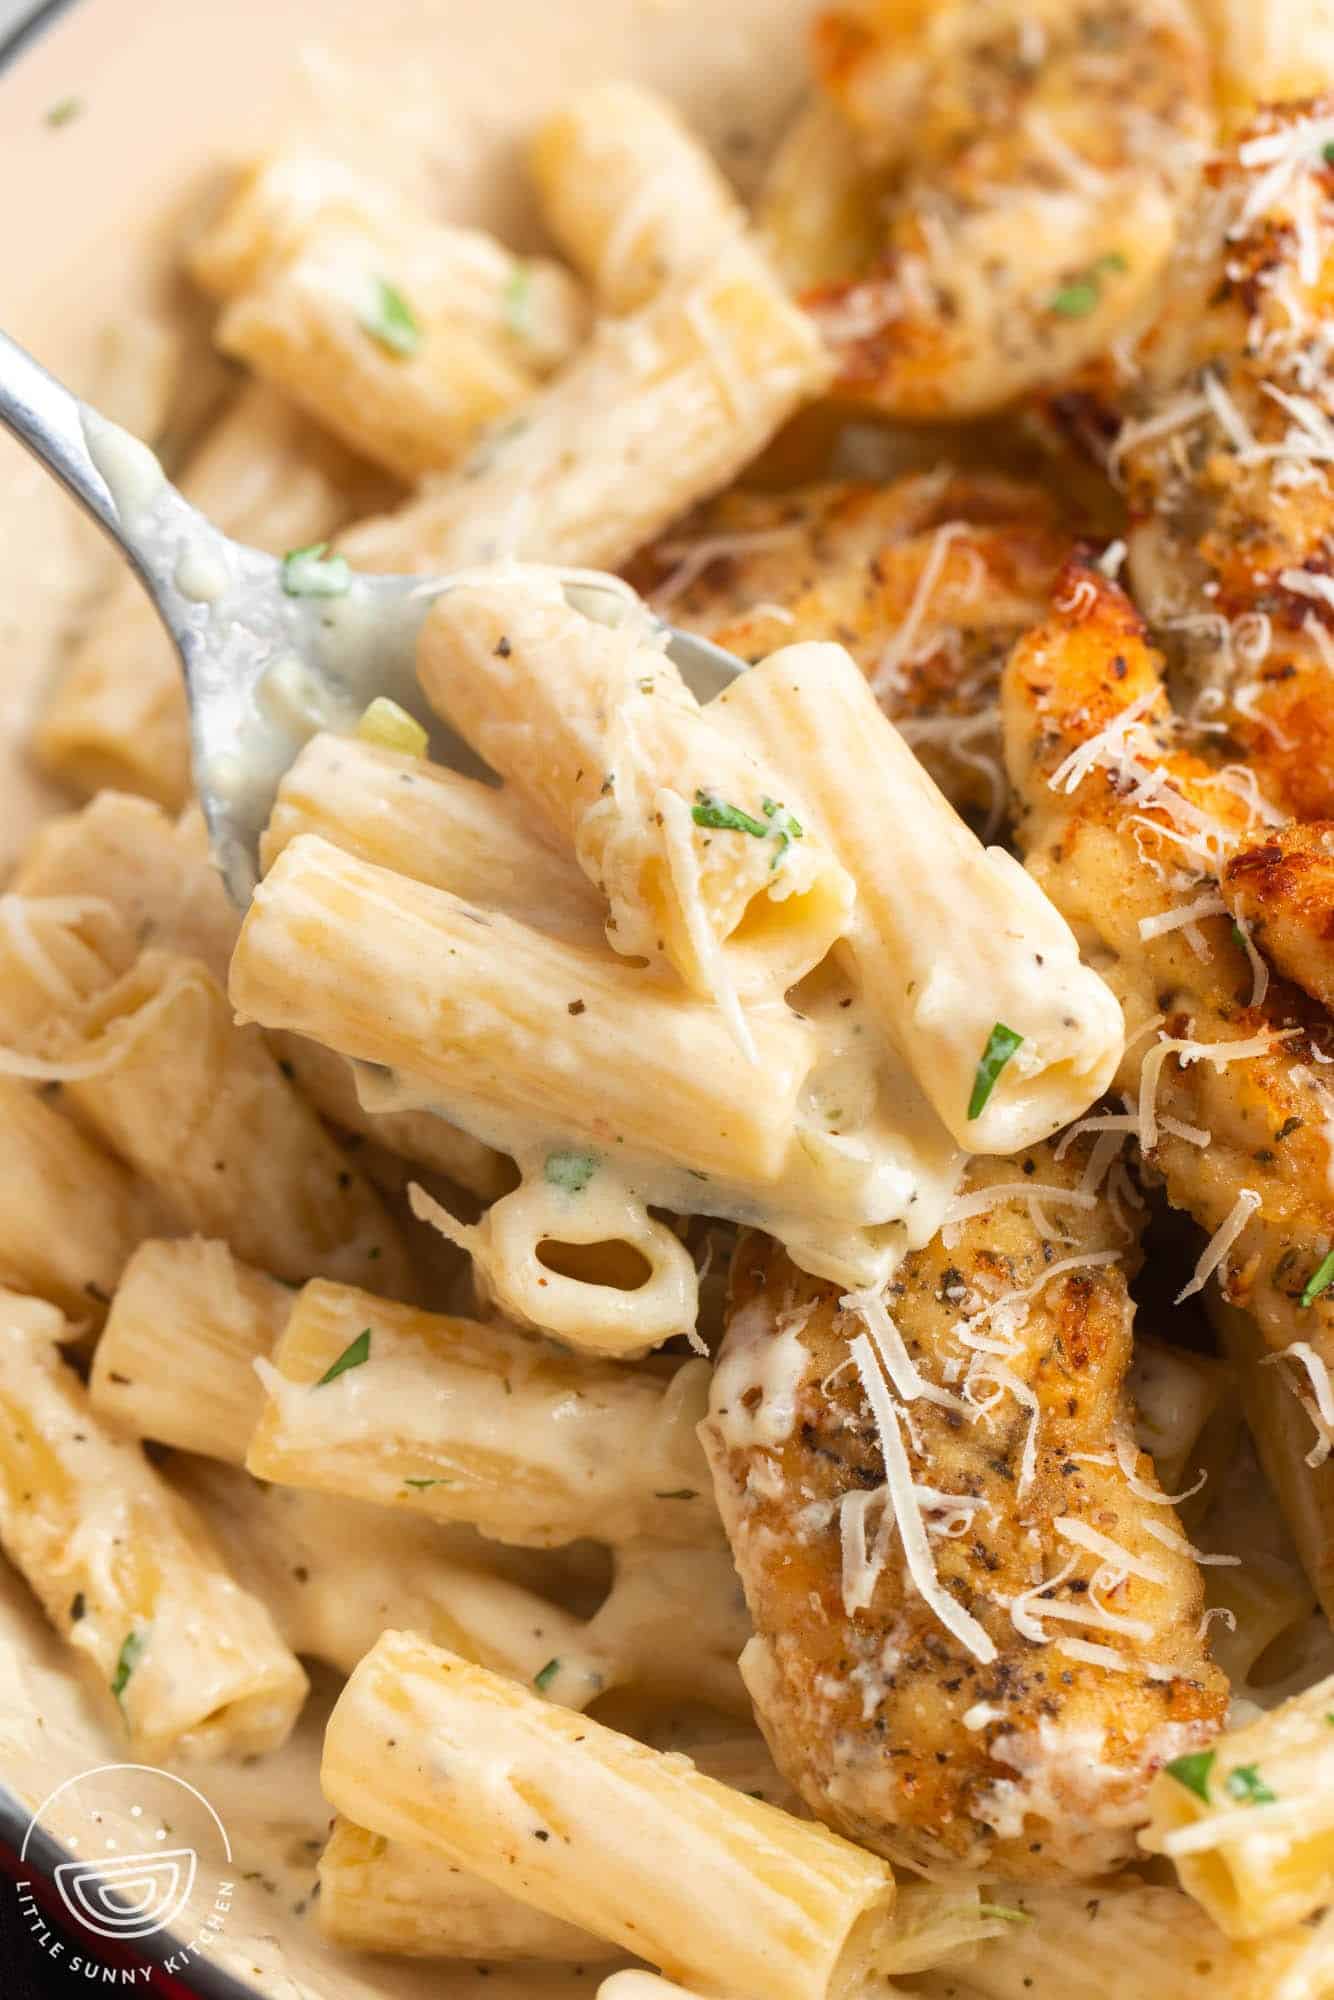 a spoon holding creamy ziti pasta with parmesan cheese, picked up from a skillet filled with pasta and pan seared chicken tenders.